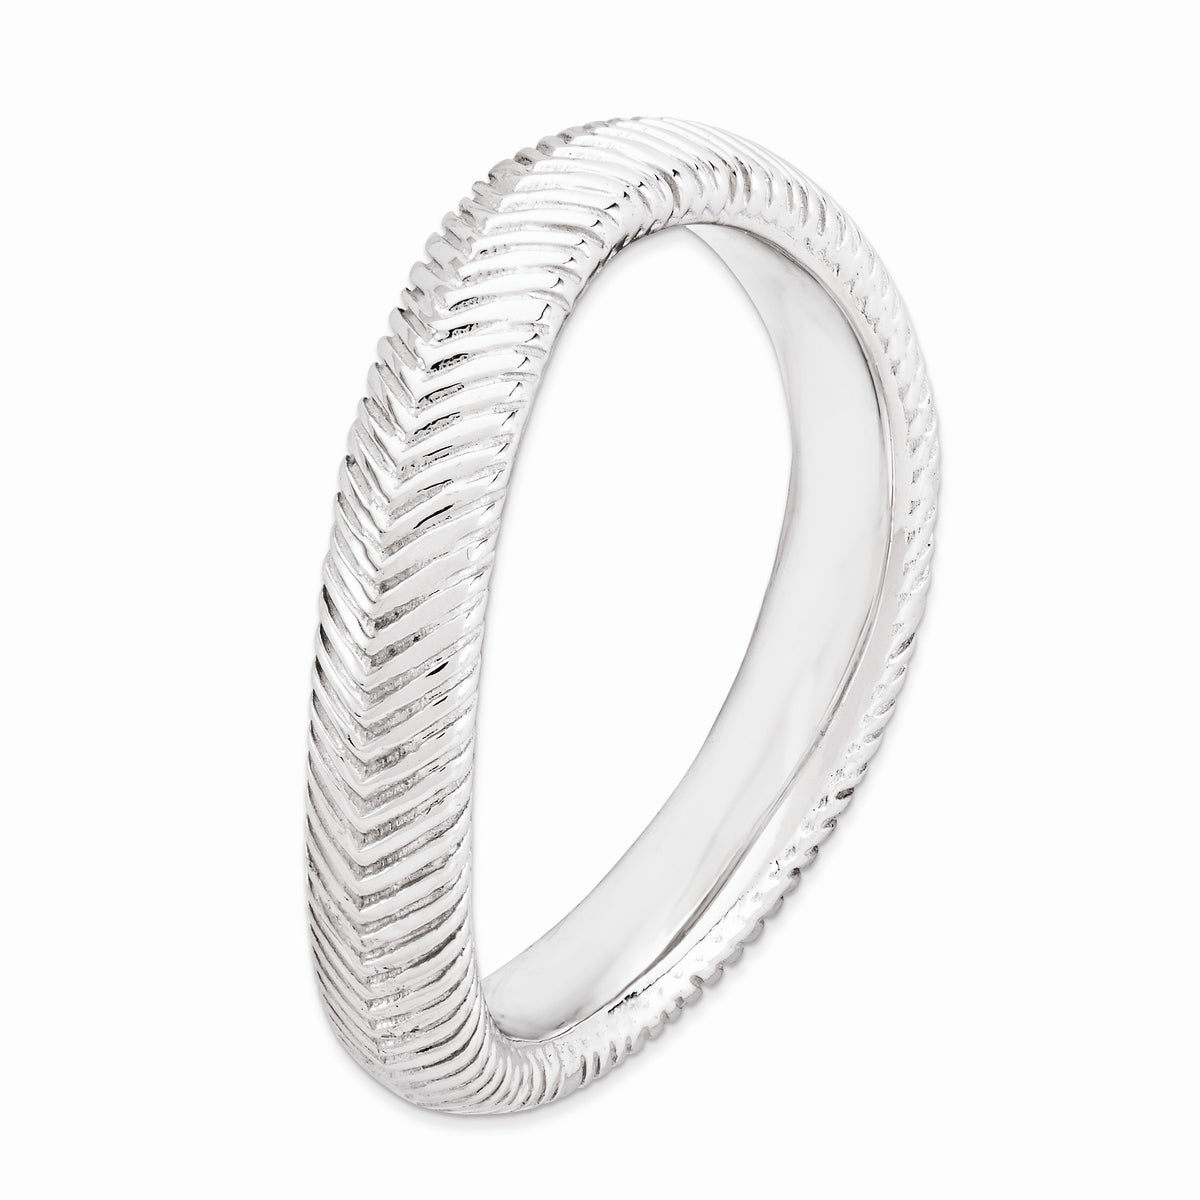 Alternate view of the 3.25mm Stackable Sterling Silver Curved Herringbone Band by The Black Bow Jewelry Co.